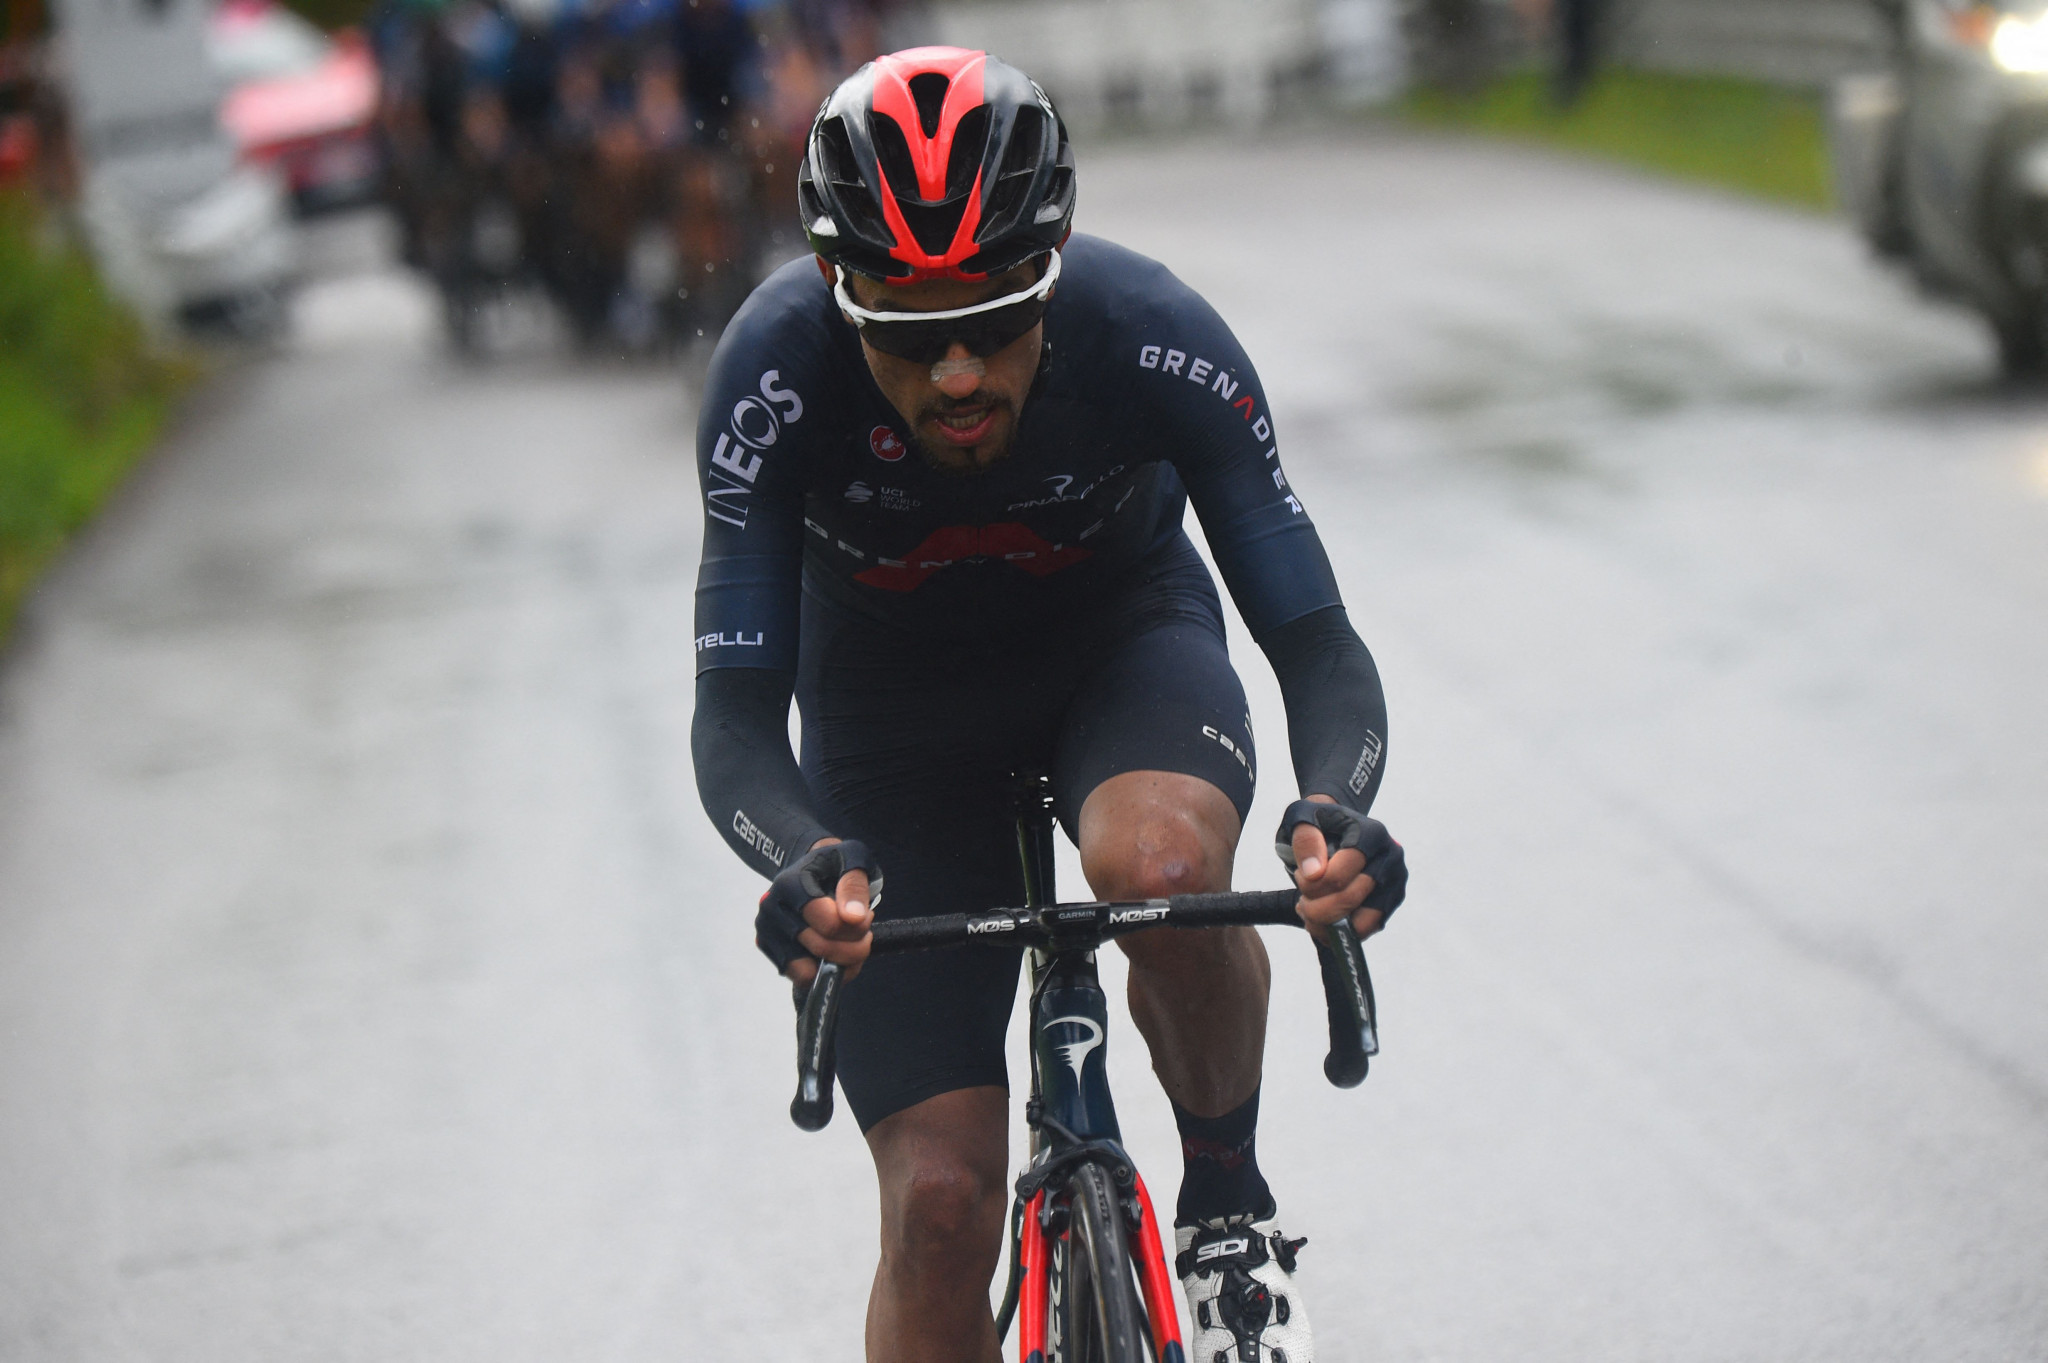 Martinez wins Tour of the Basque Country as Izagirre claims final stage win